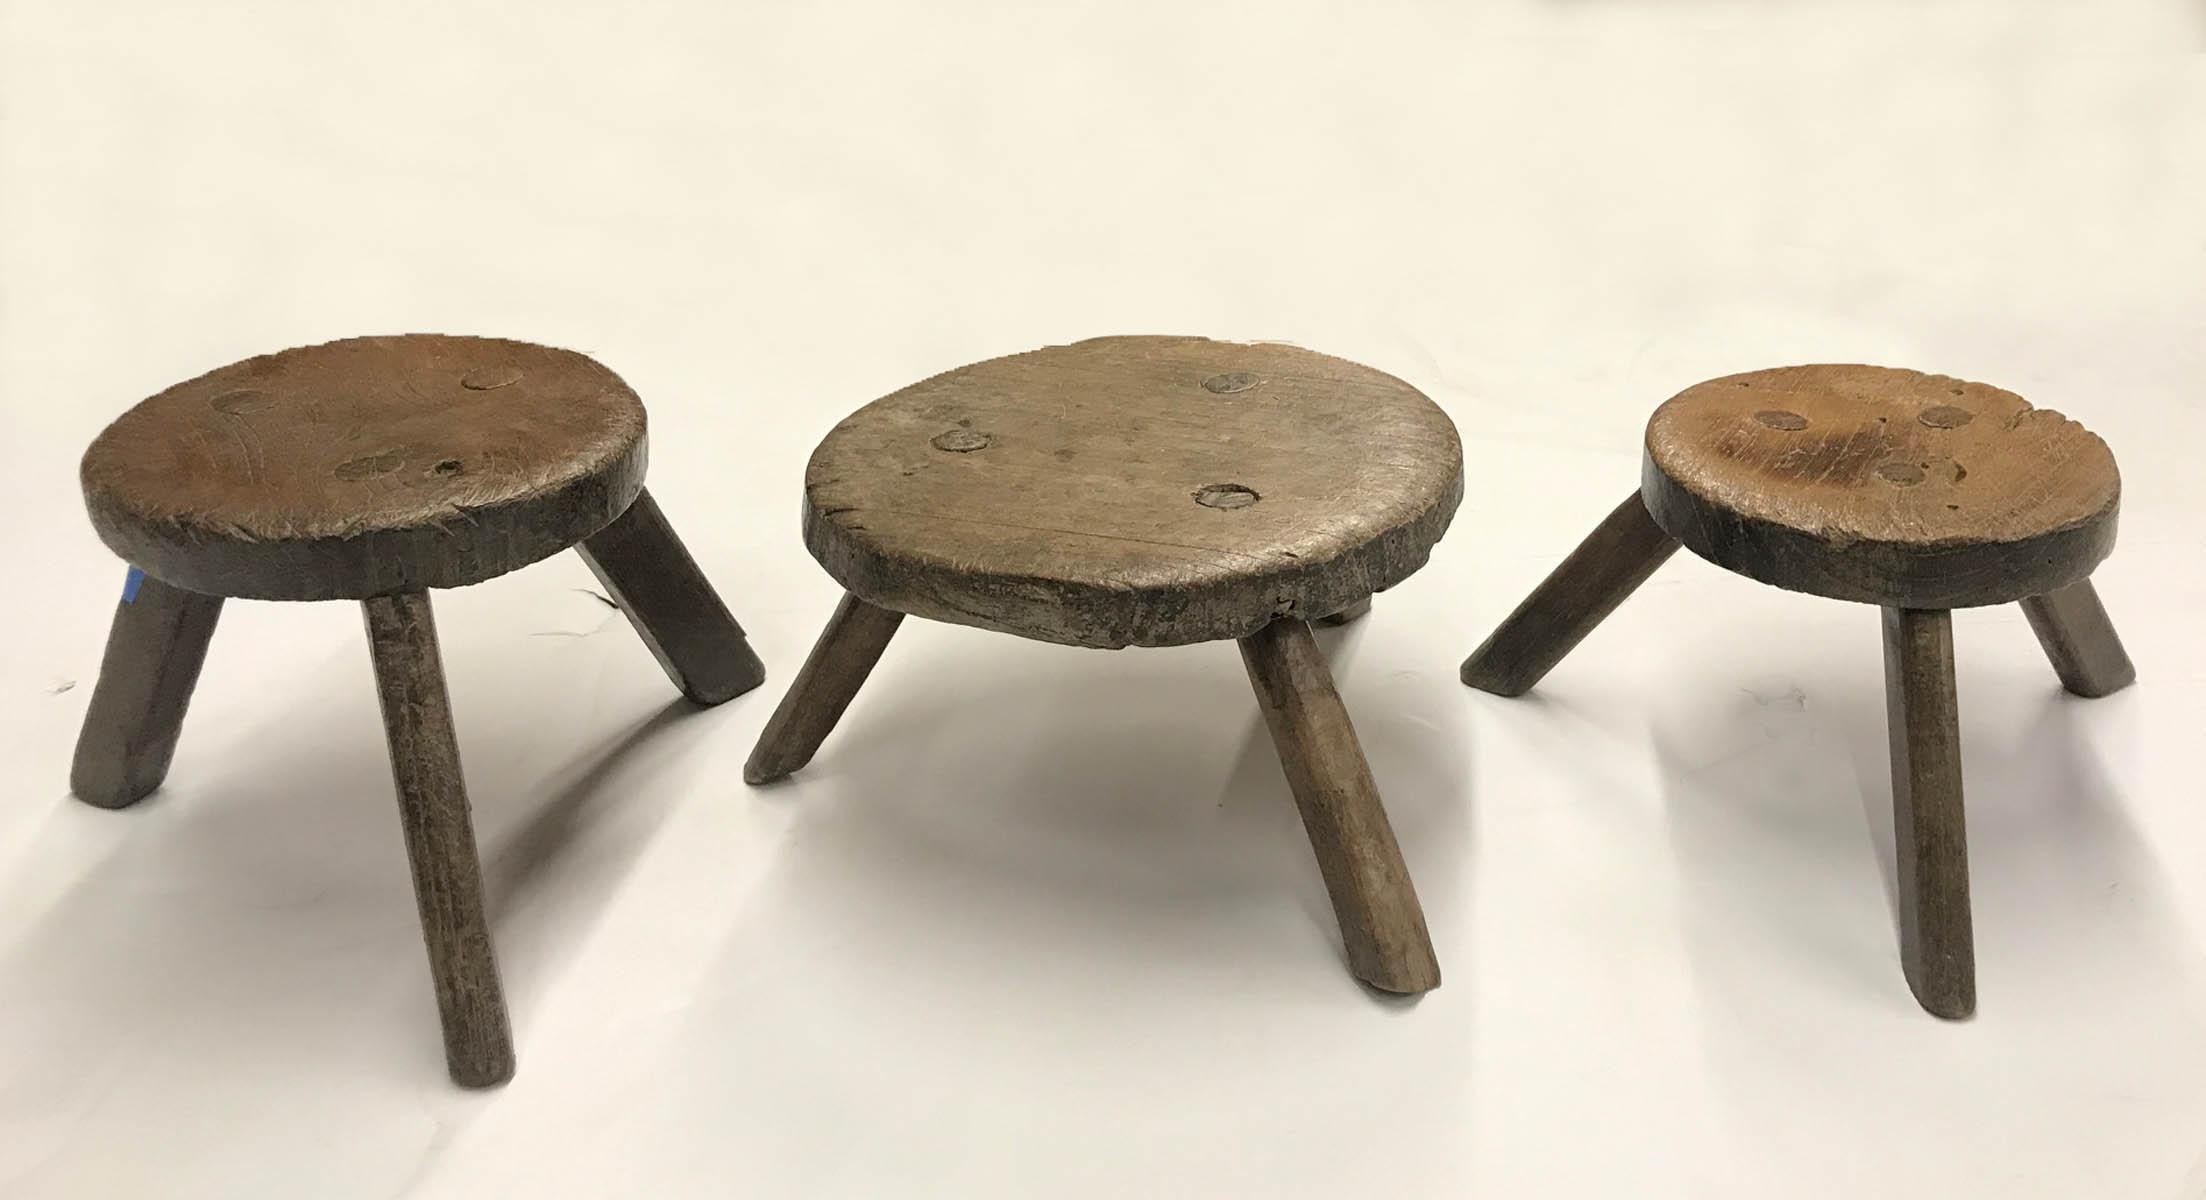 Three antique wooden milking stools with three legs. Great old natural patina. Sturdy.
Can be sold as a group for listed price or individually. Please refer to left, middle or right when purchasing.
Measures: Left 9 D x 8 H $325 list
Middle 12 D x 7